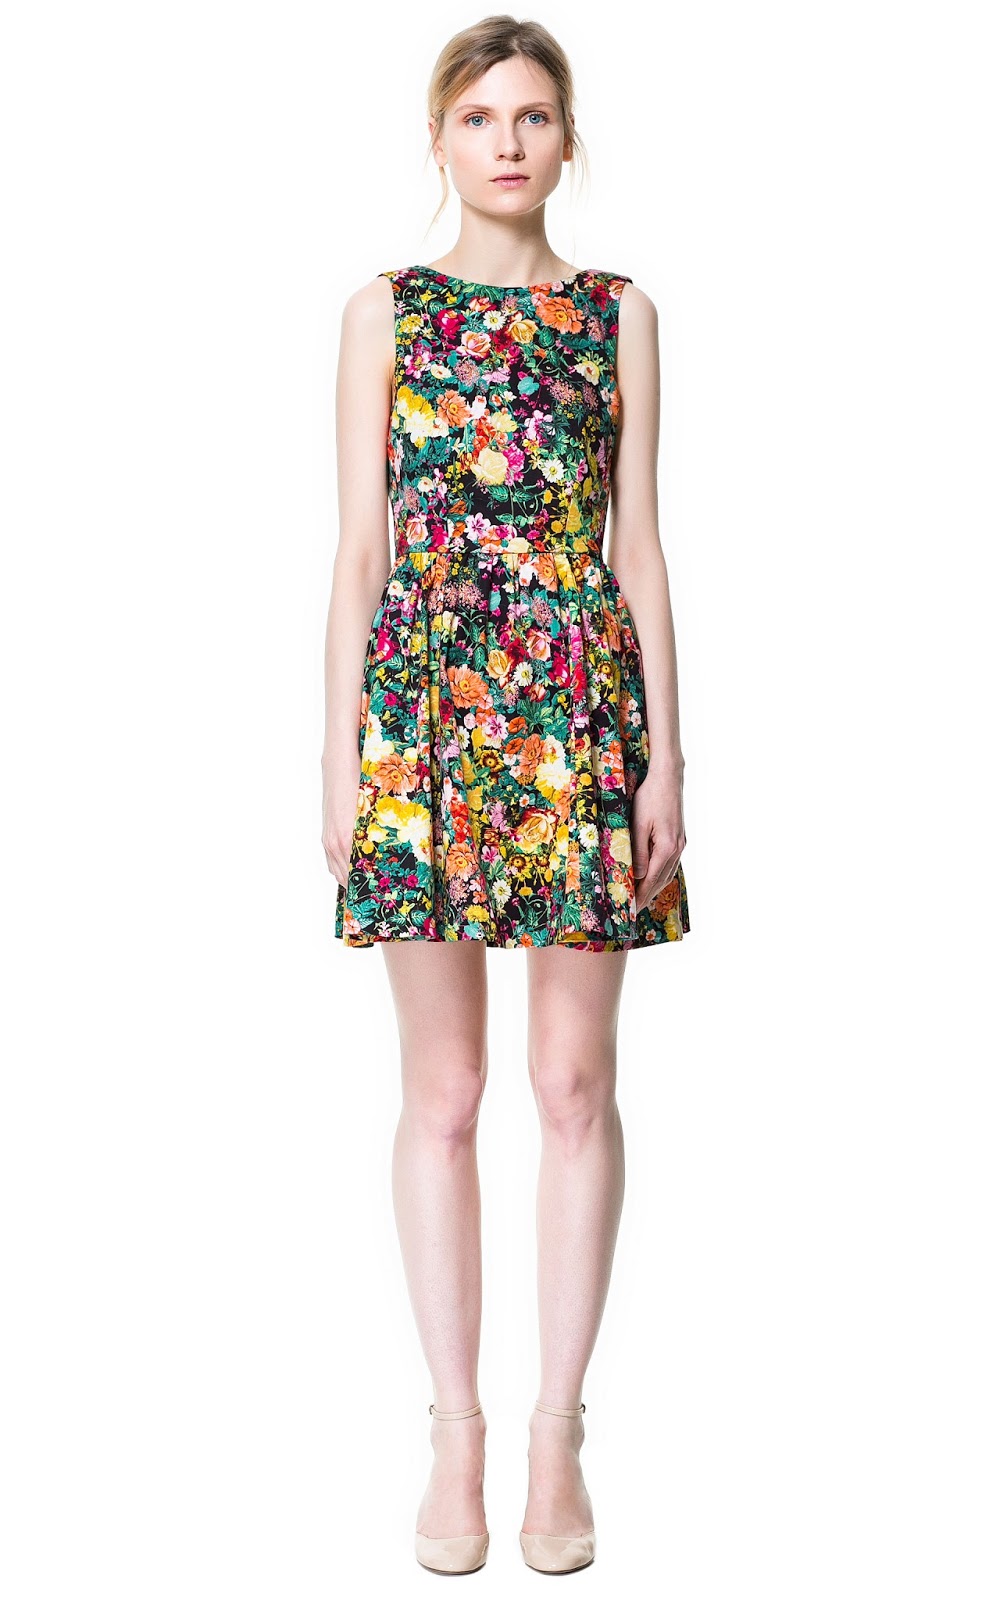 ZARA NEW COLLECTION 2013. DIVINE FLORAL PRINTED PLEATED DRESS. BLOGGERS ...